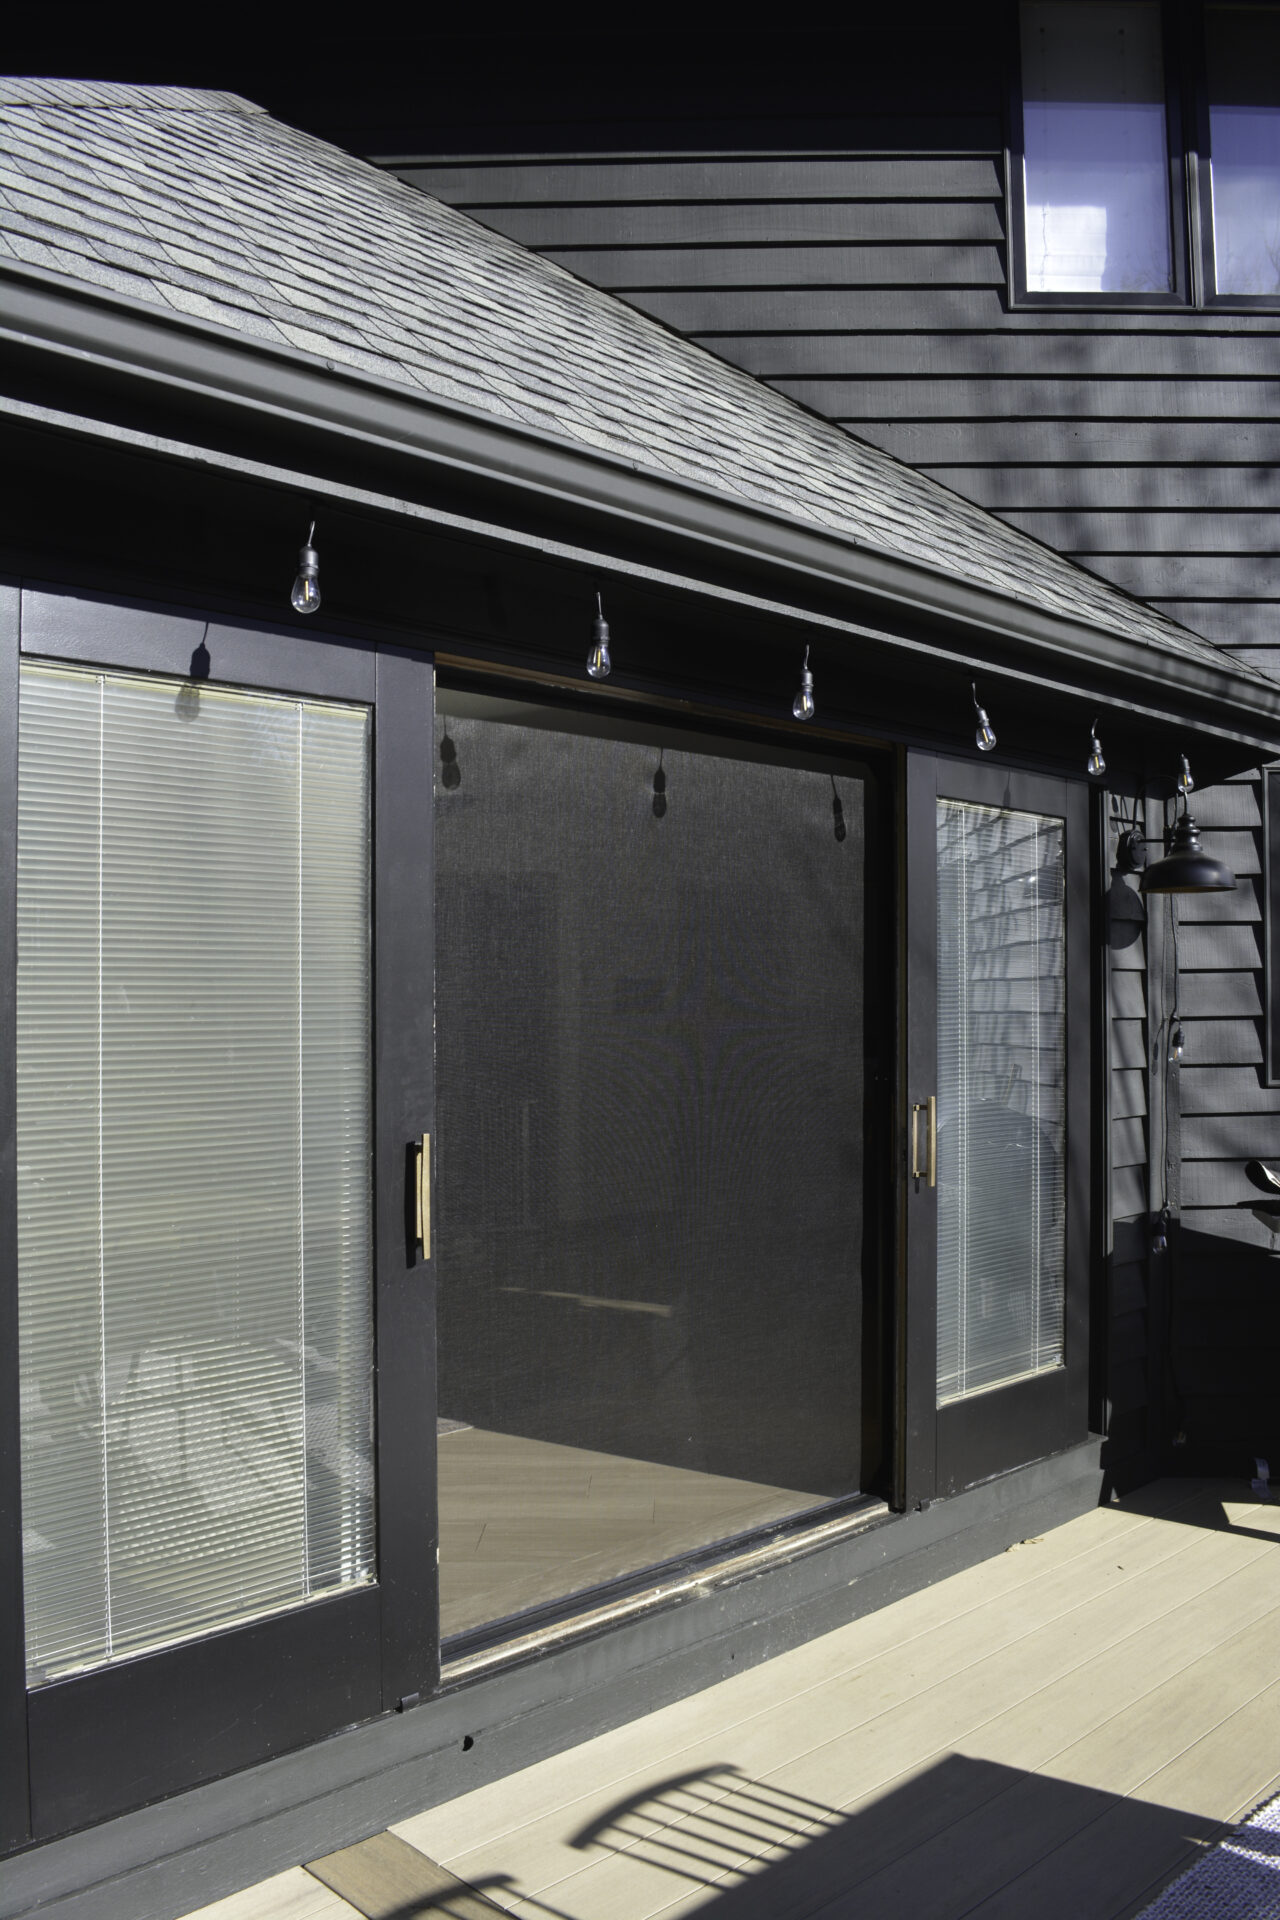 Screening Solutions Ohio uses a Phantom Retractable Screen to screen an extra large opening.